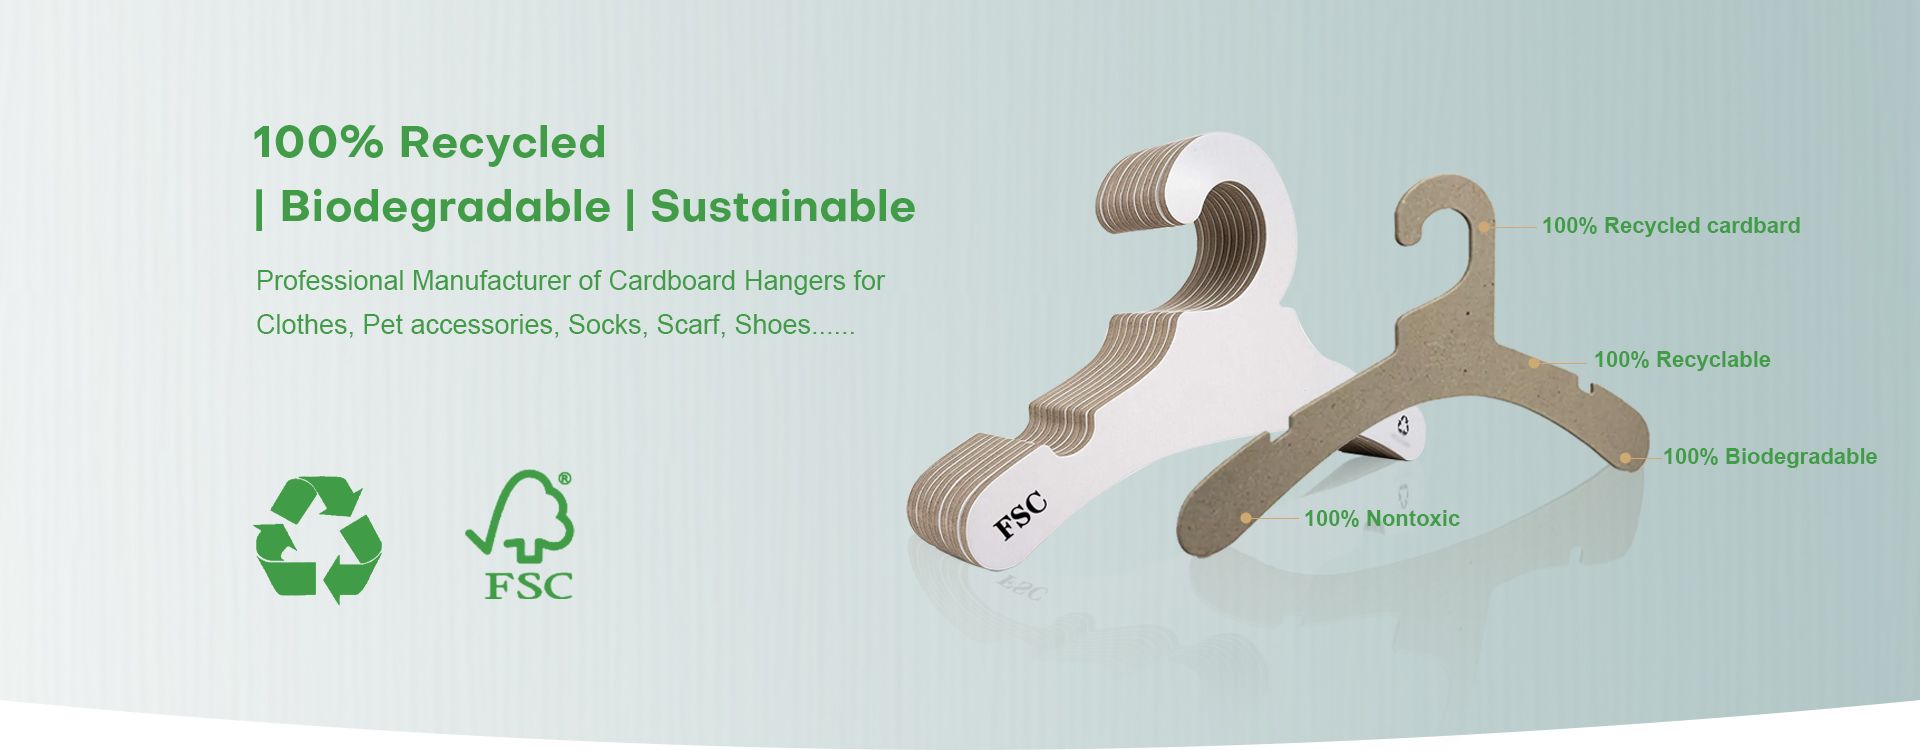 Clothes Cardboard Hangers